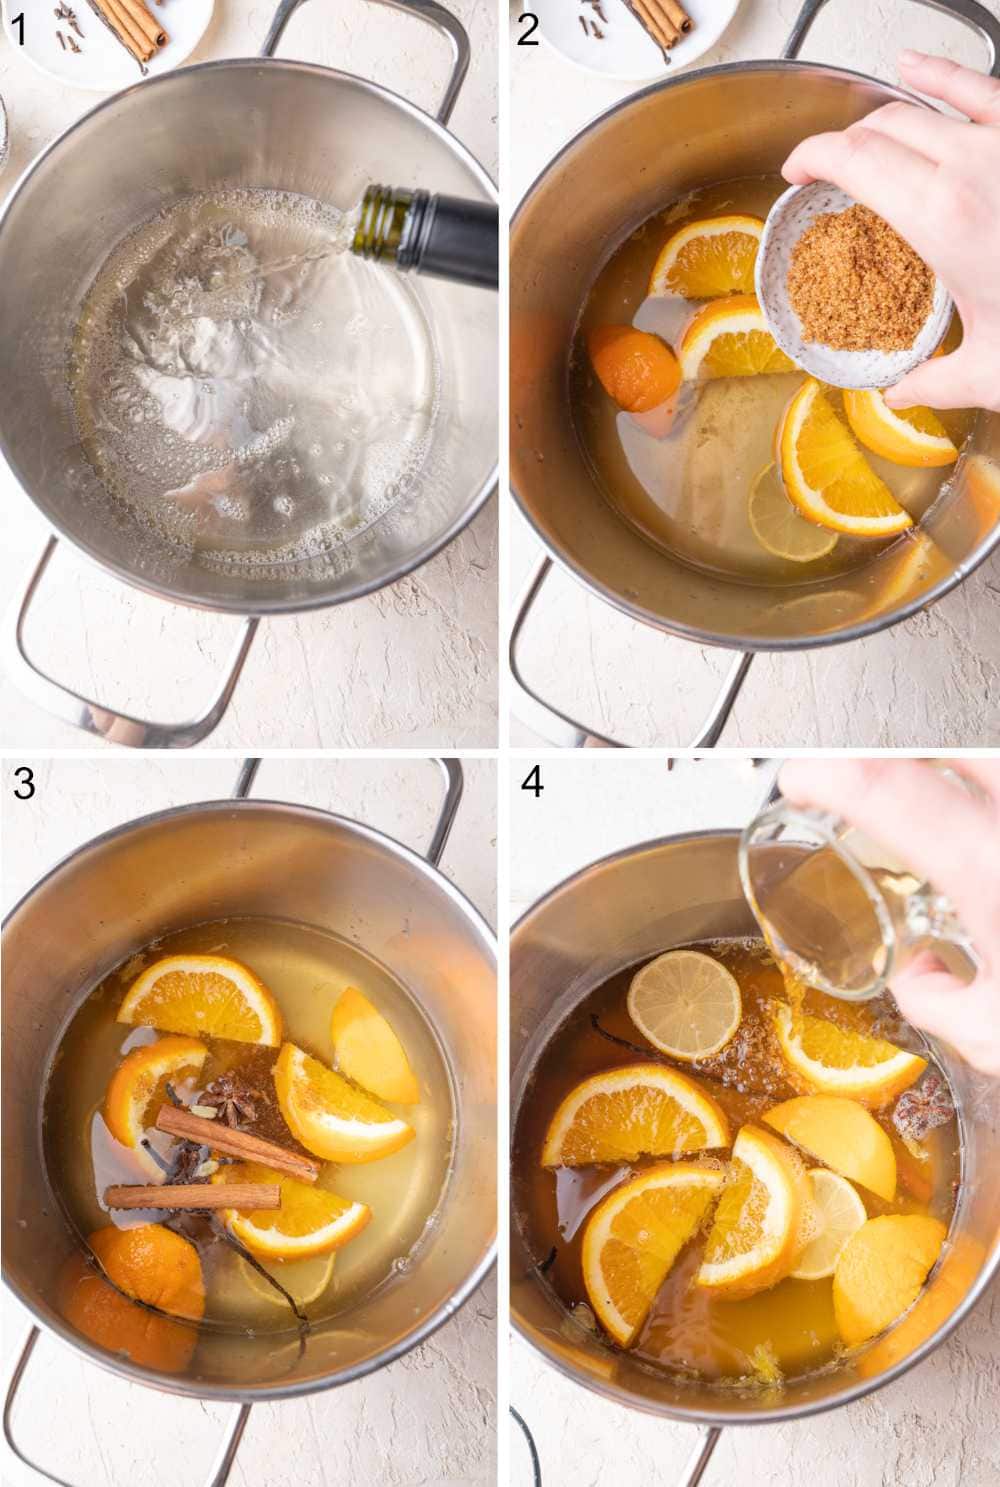 A collage of 4 photos showing how to prepare mulled white wine step by step.